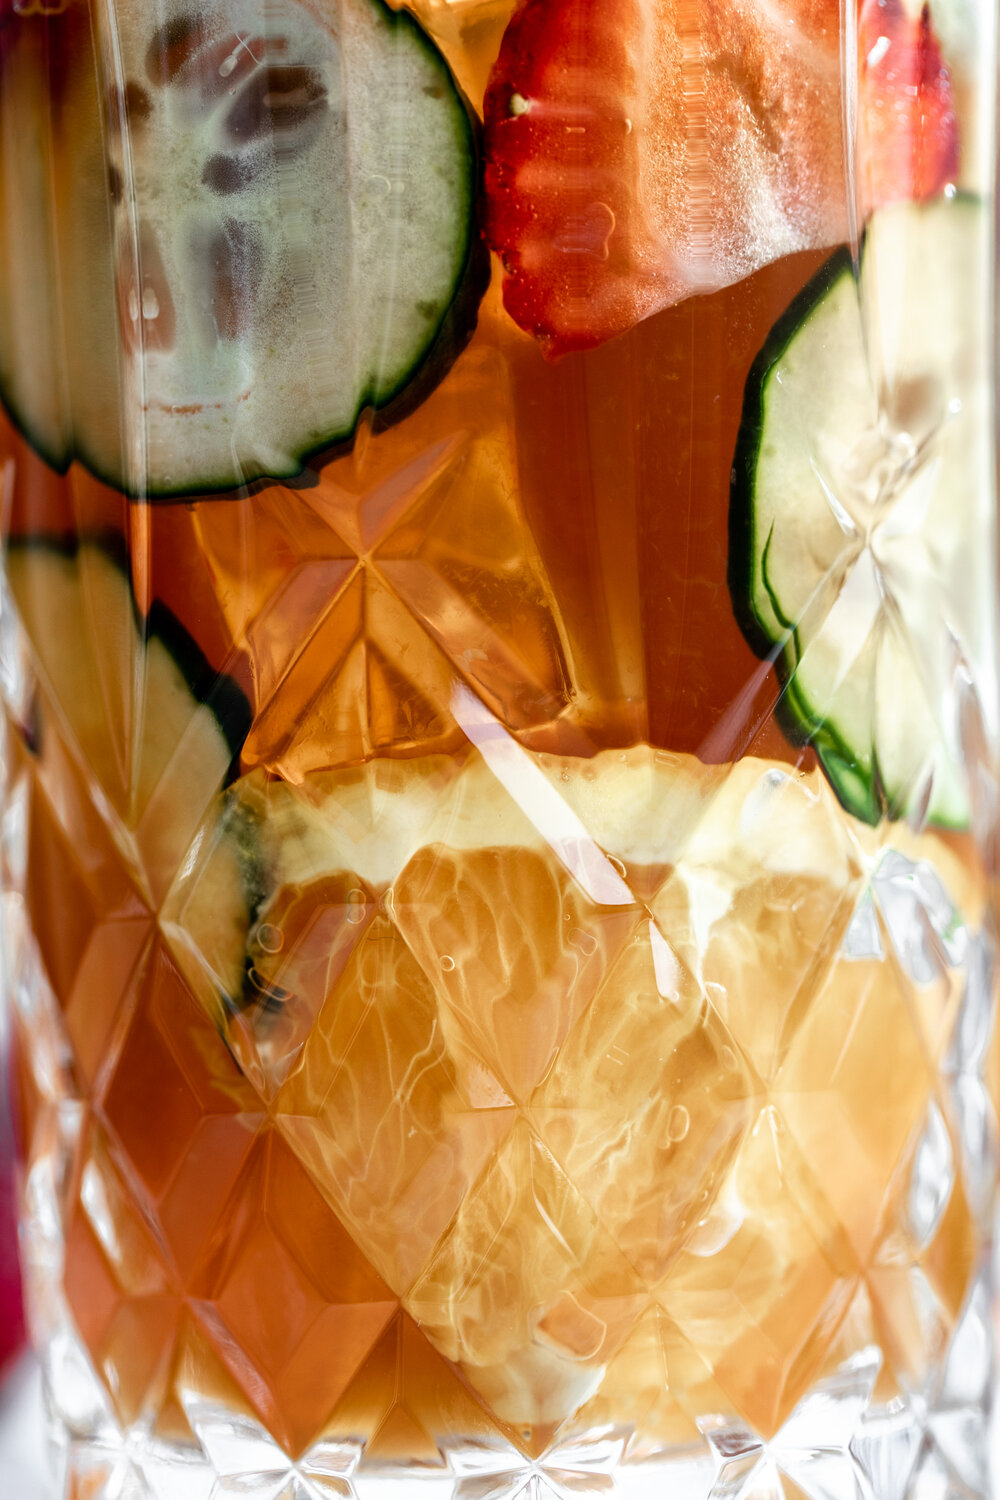 Pimm's Cup gin liqueur cocktail recipe with strawberries cucumber and orange slices in a crystal high ball glass